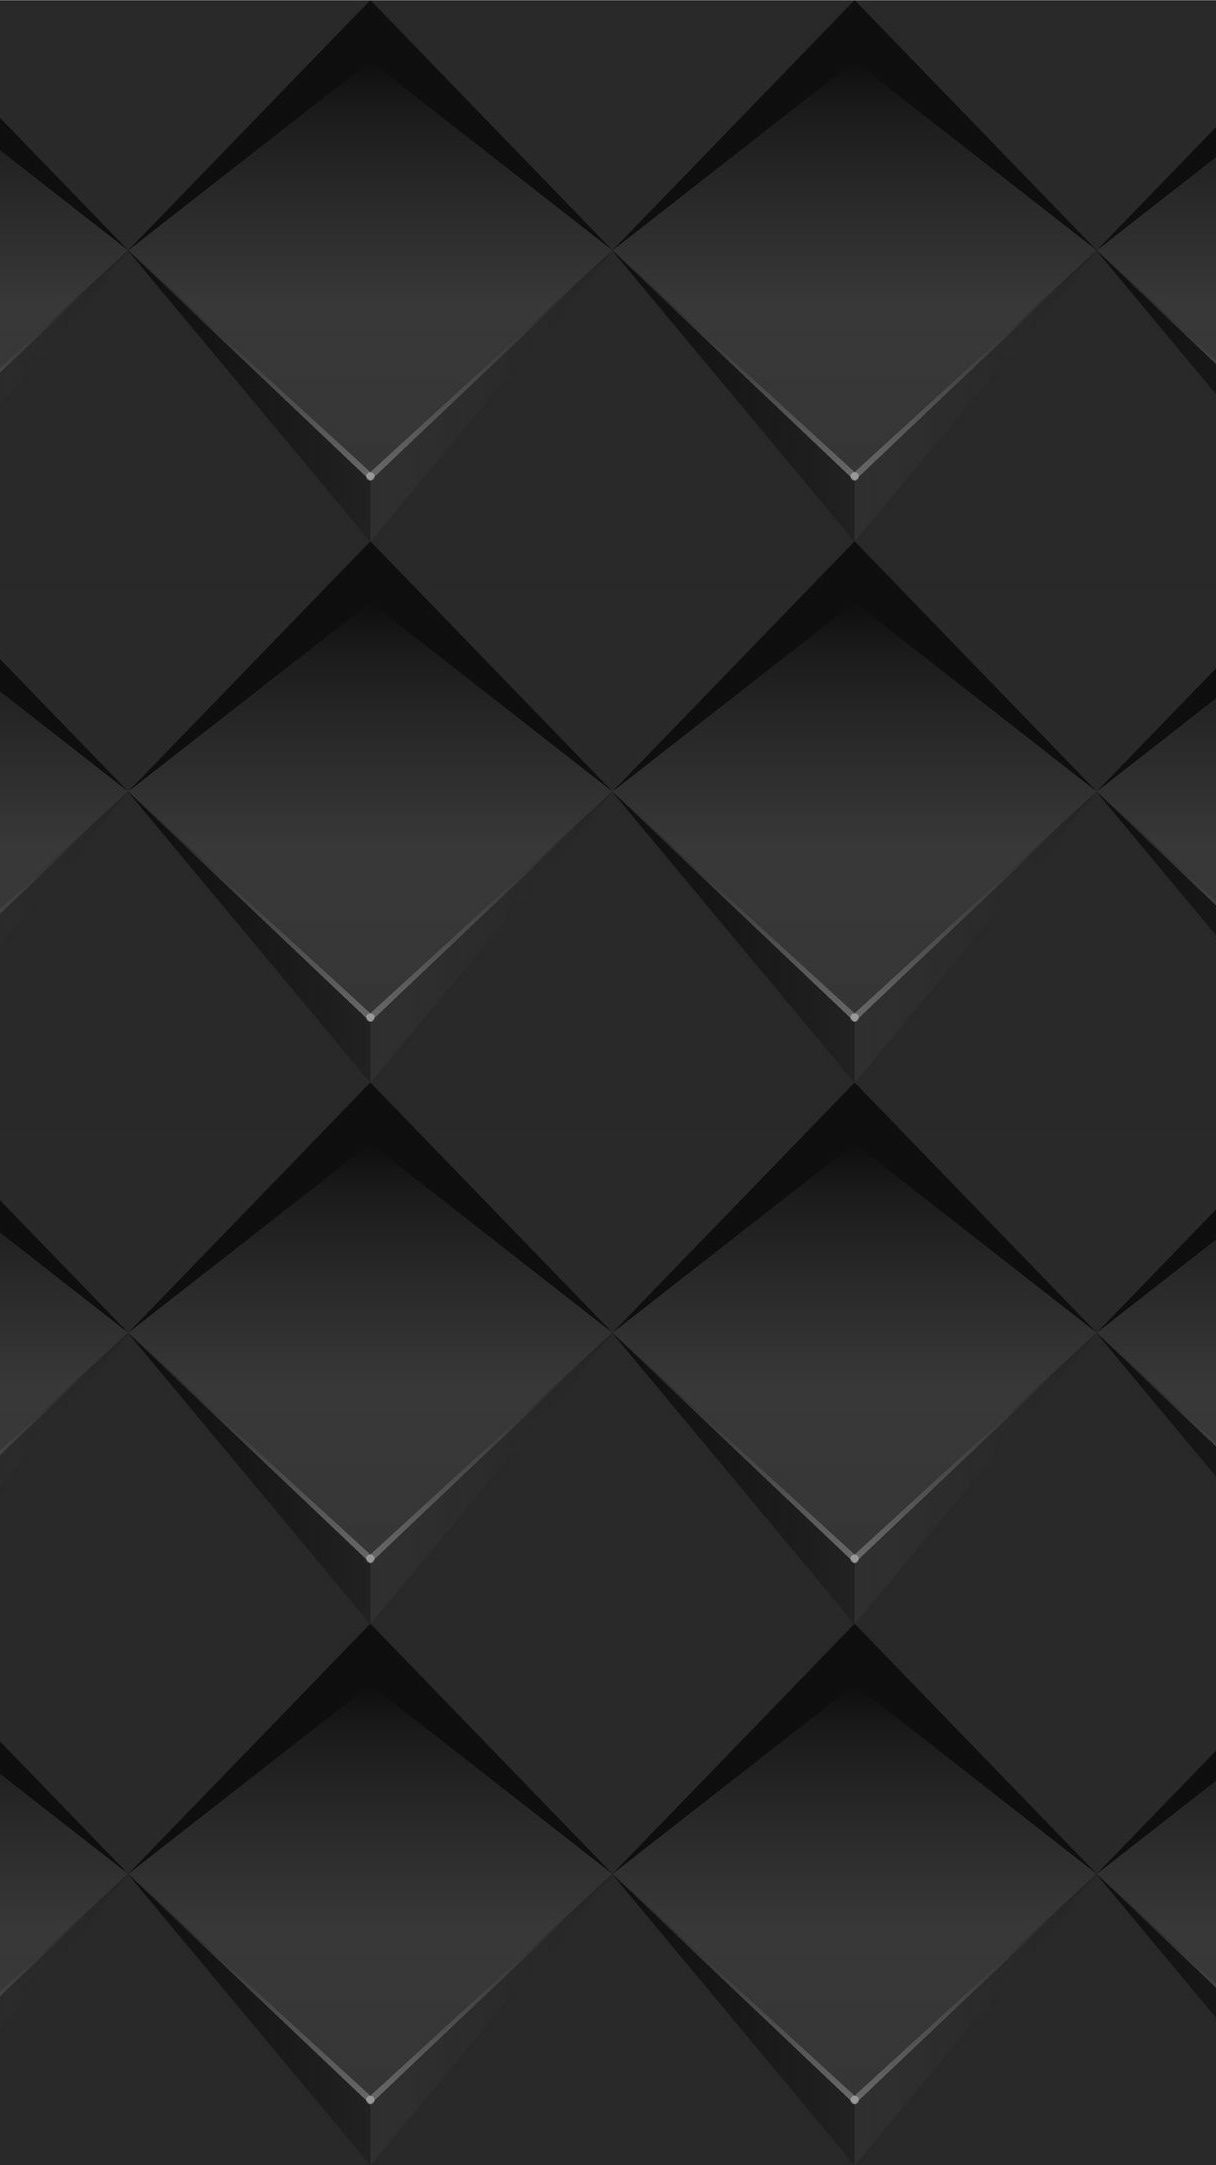 Geometric iPhone wallpaper wallpaper Collections